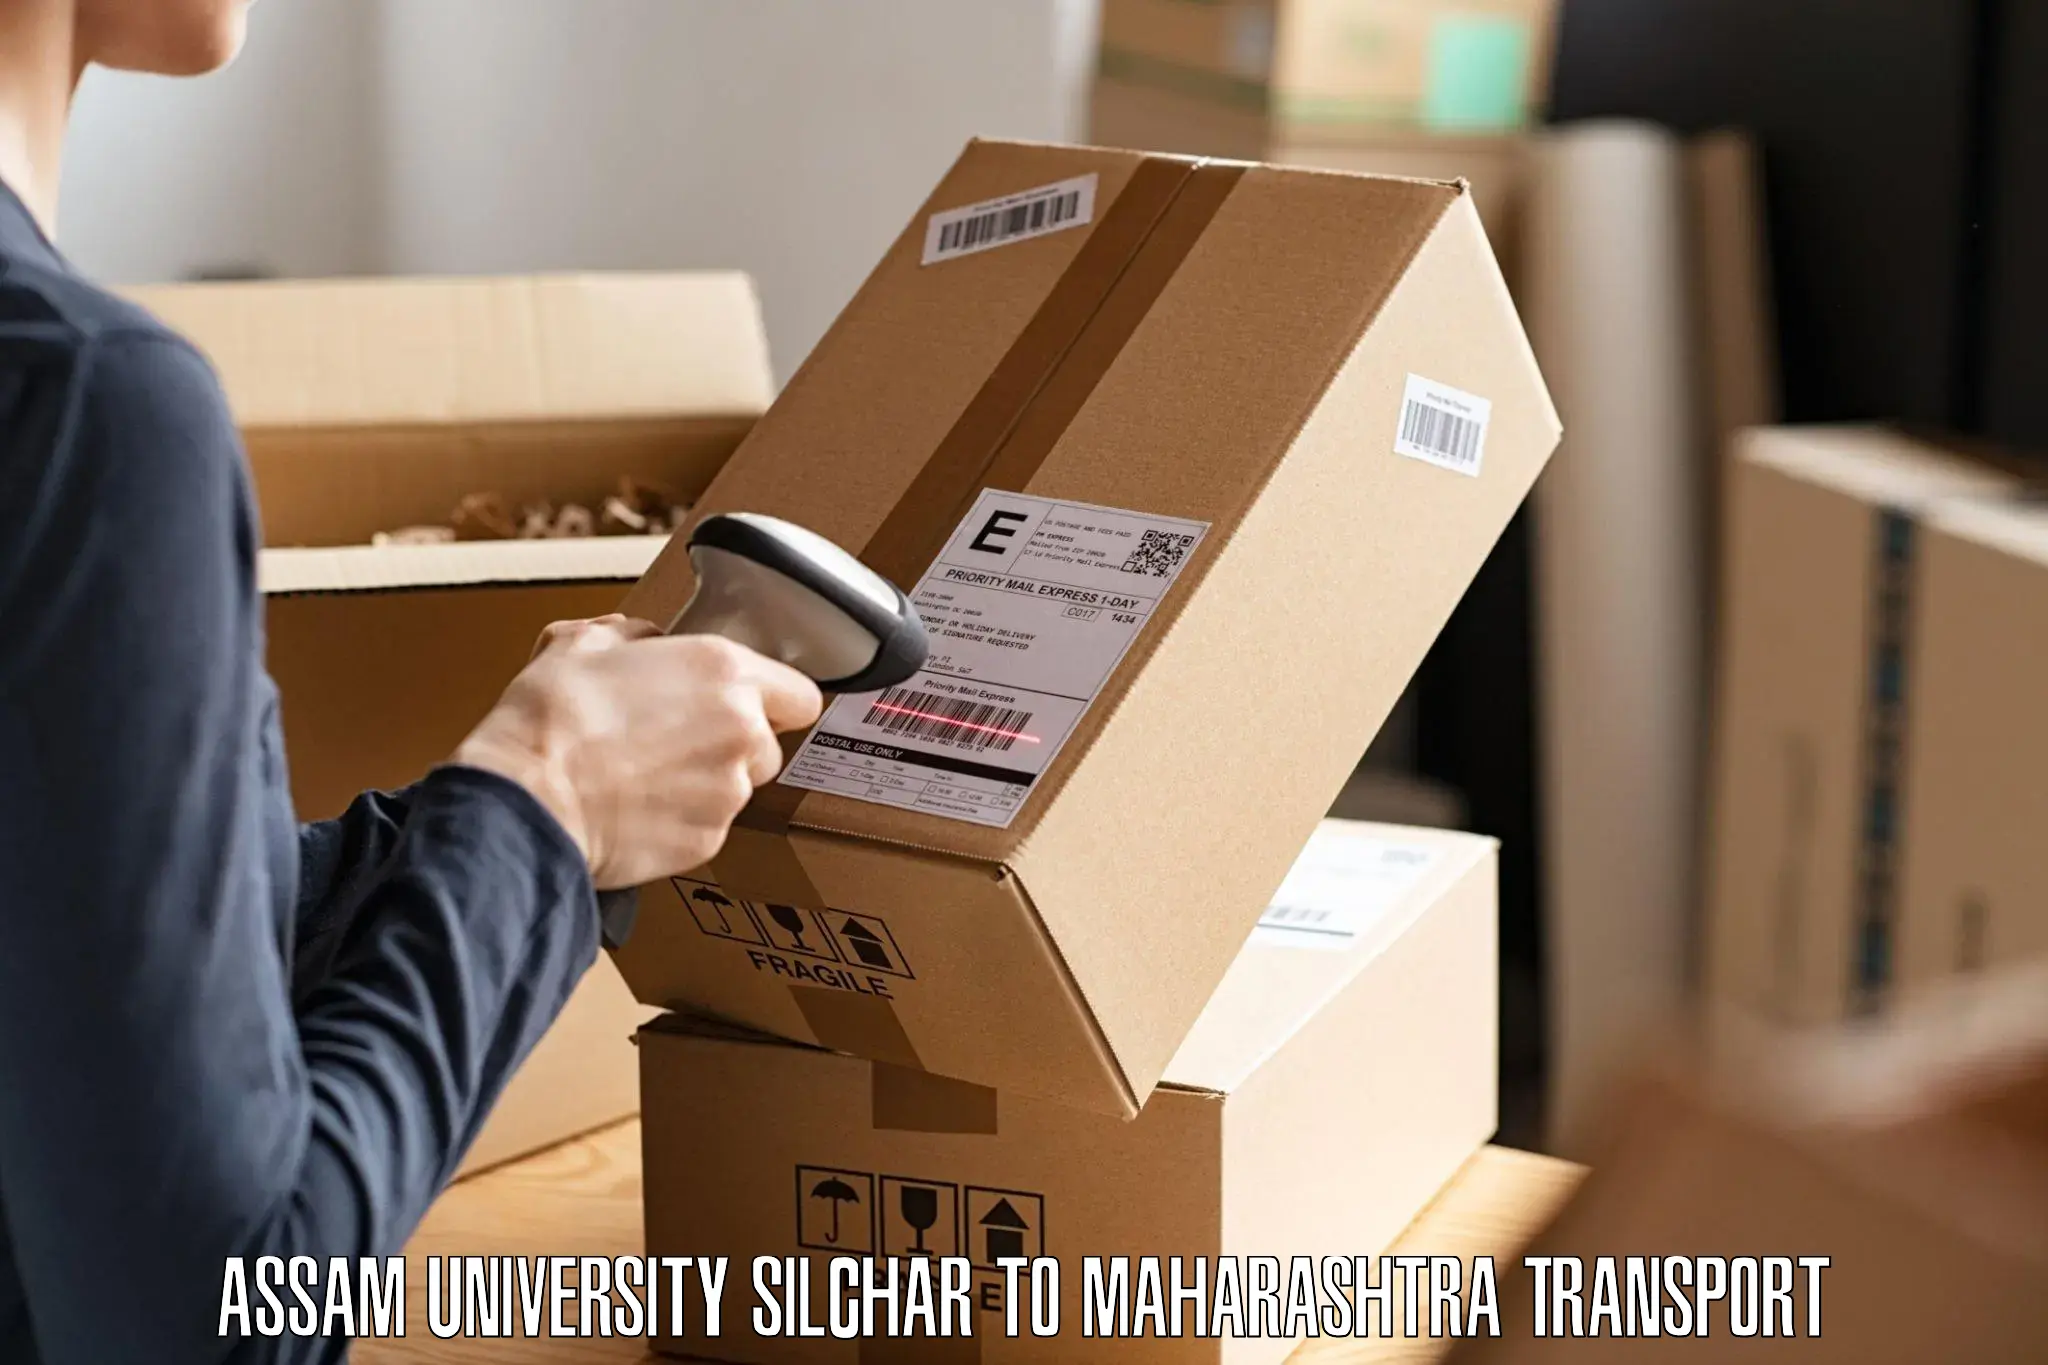 Shipping services in Assam University Silchar to Baramati